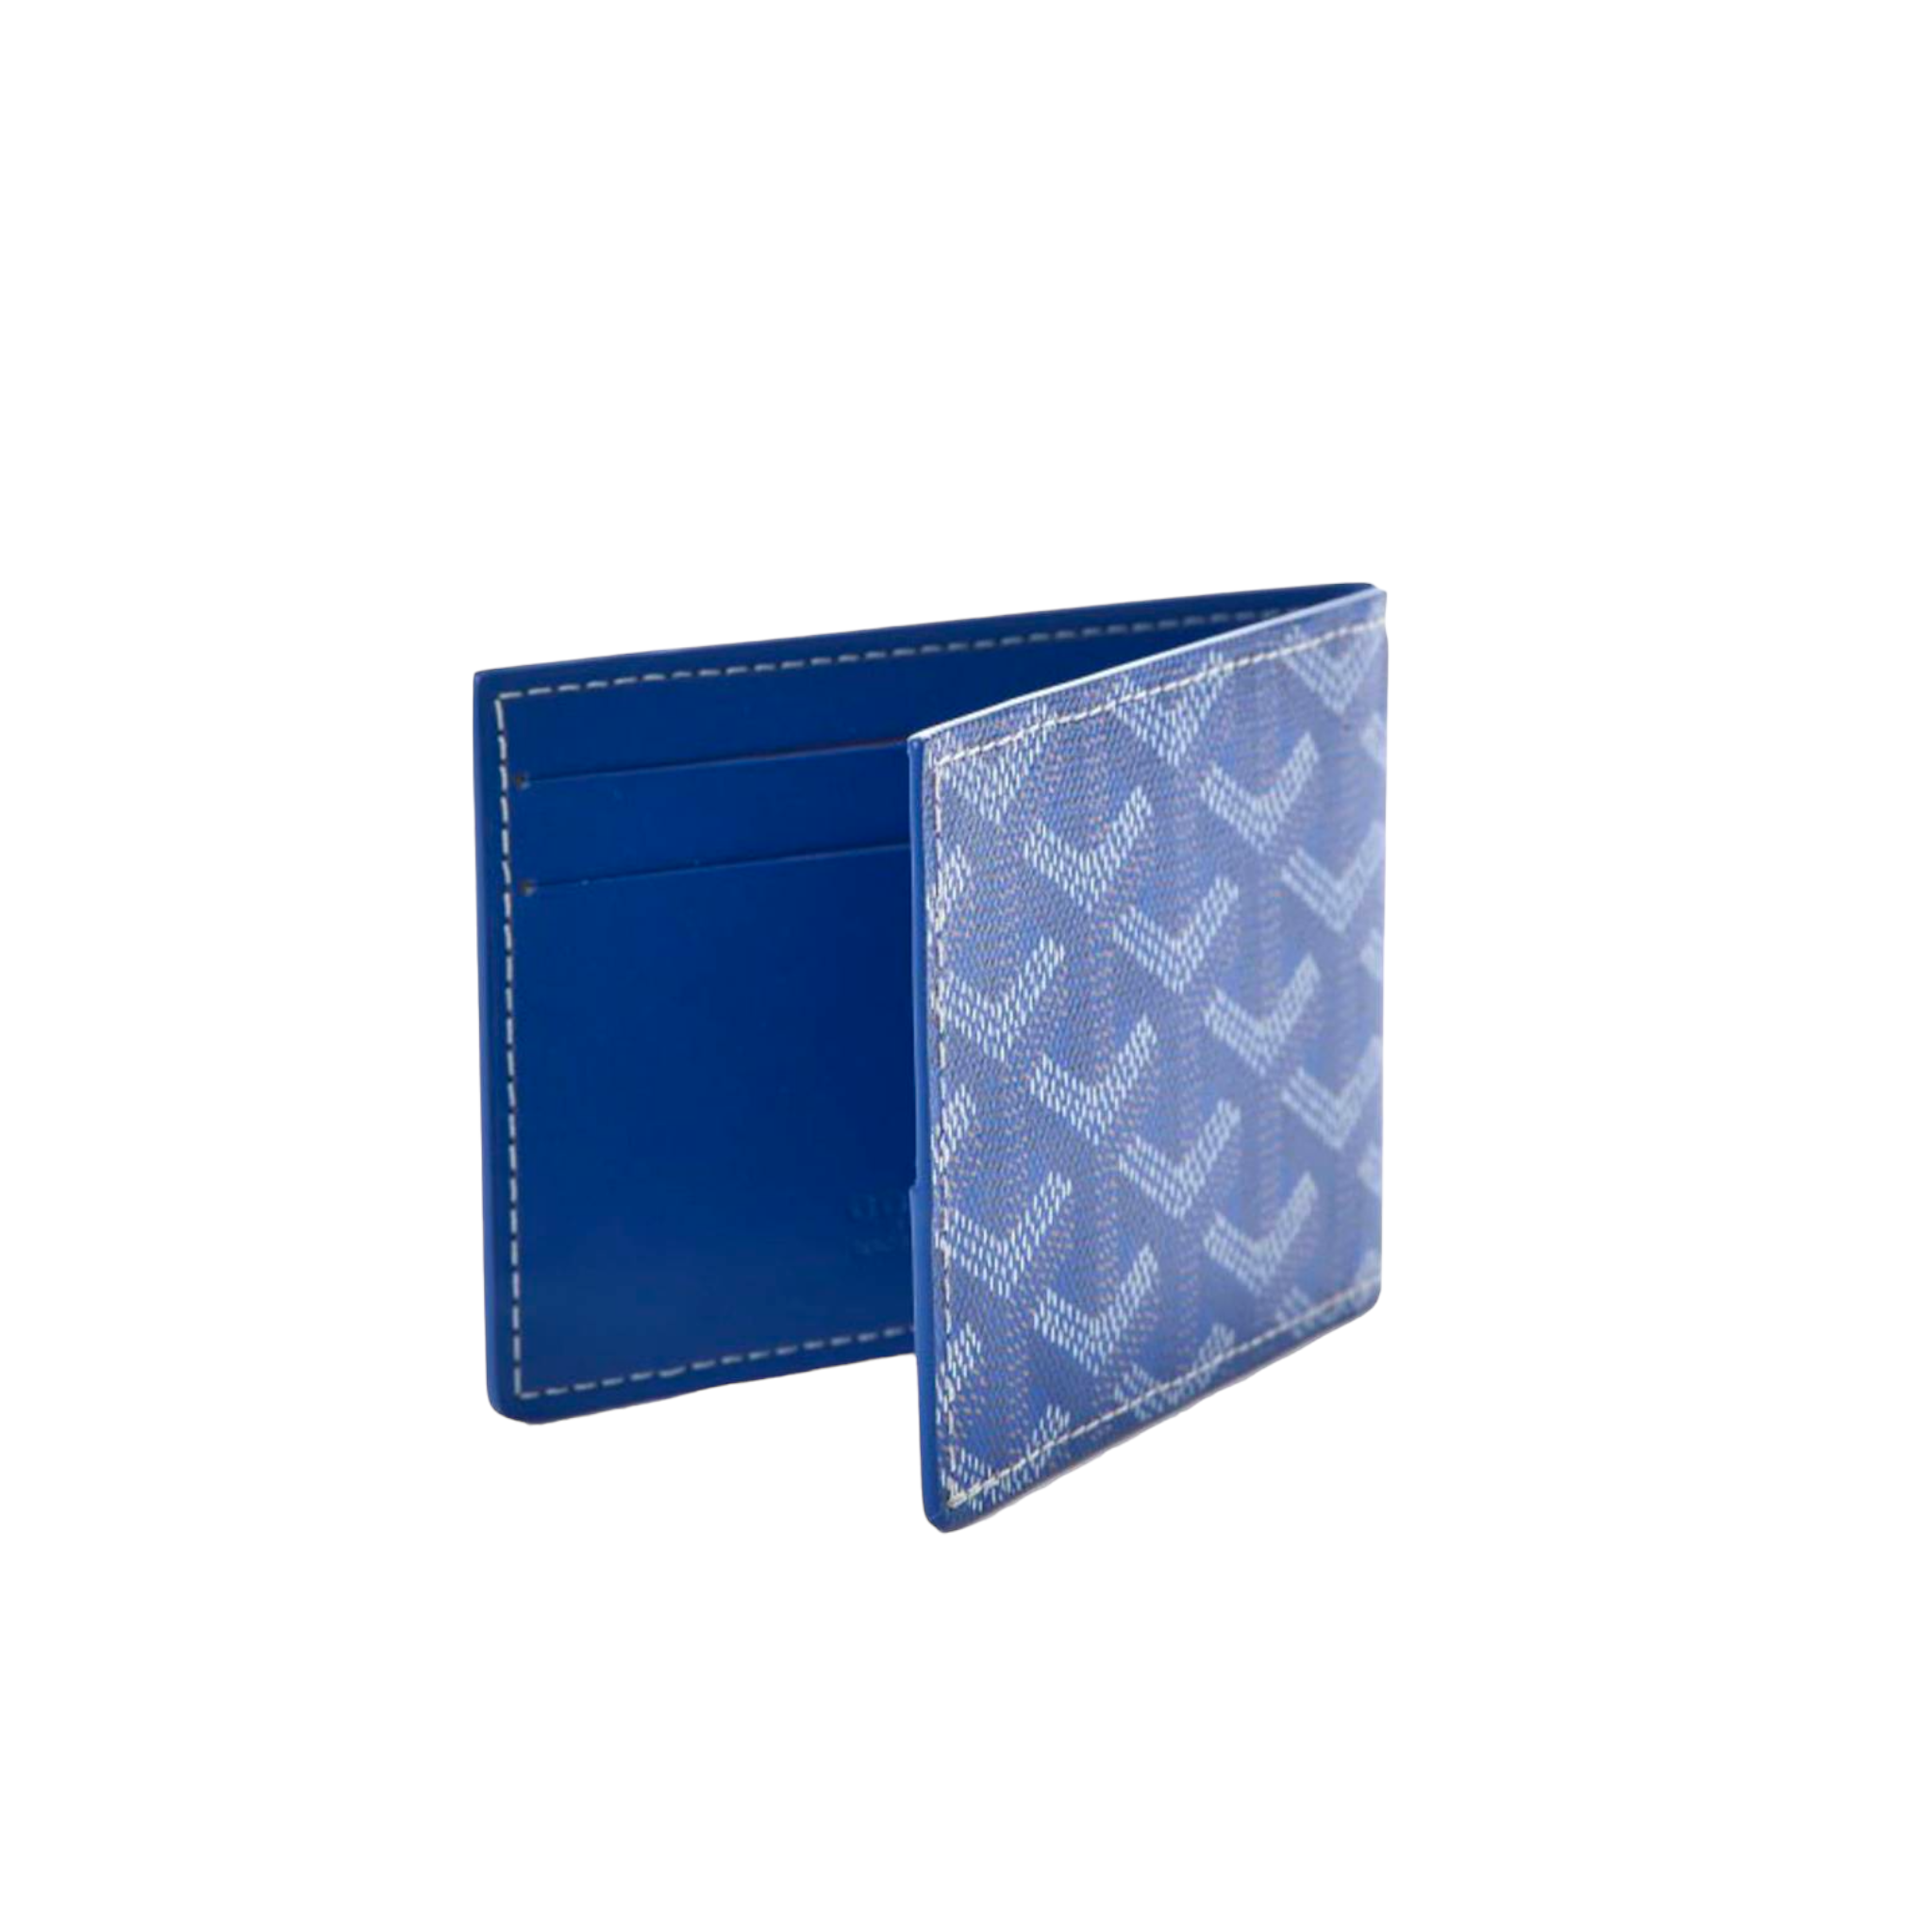 Goyard Leather Wallets for Men with Credit Card for sale